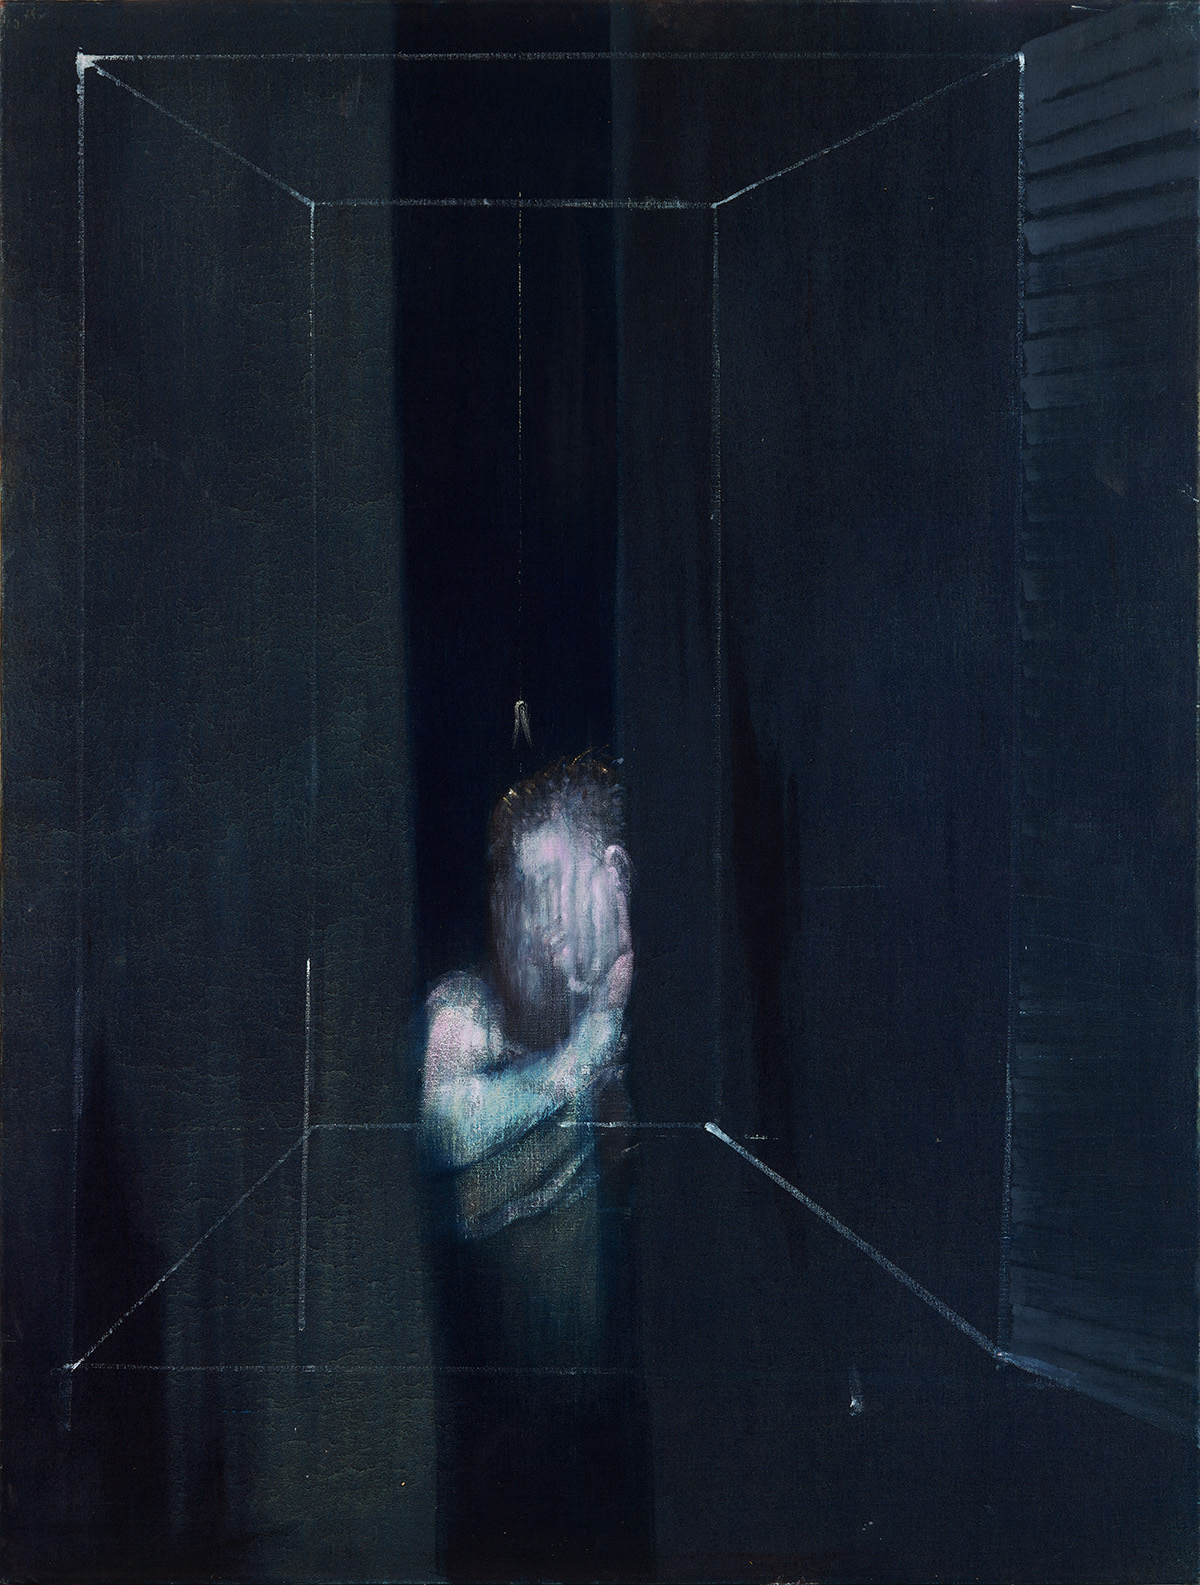 Two Figures at a Window, 1953. Oil on canvas. © The Estate of Francis Bacon / DACS London 2021. All rights reserved.